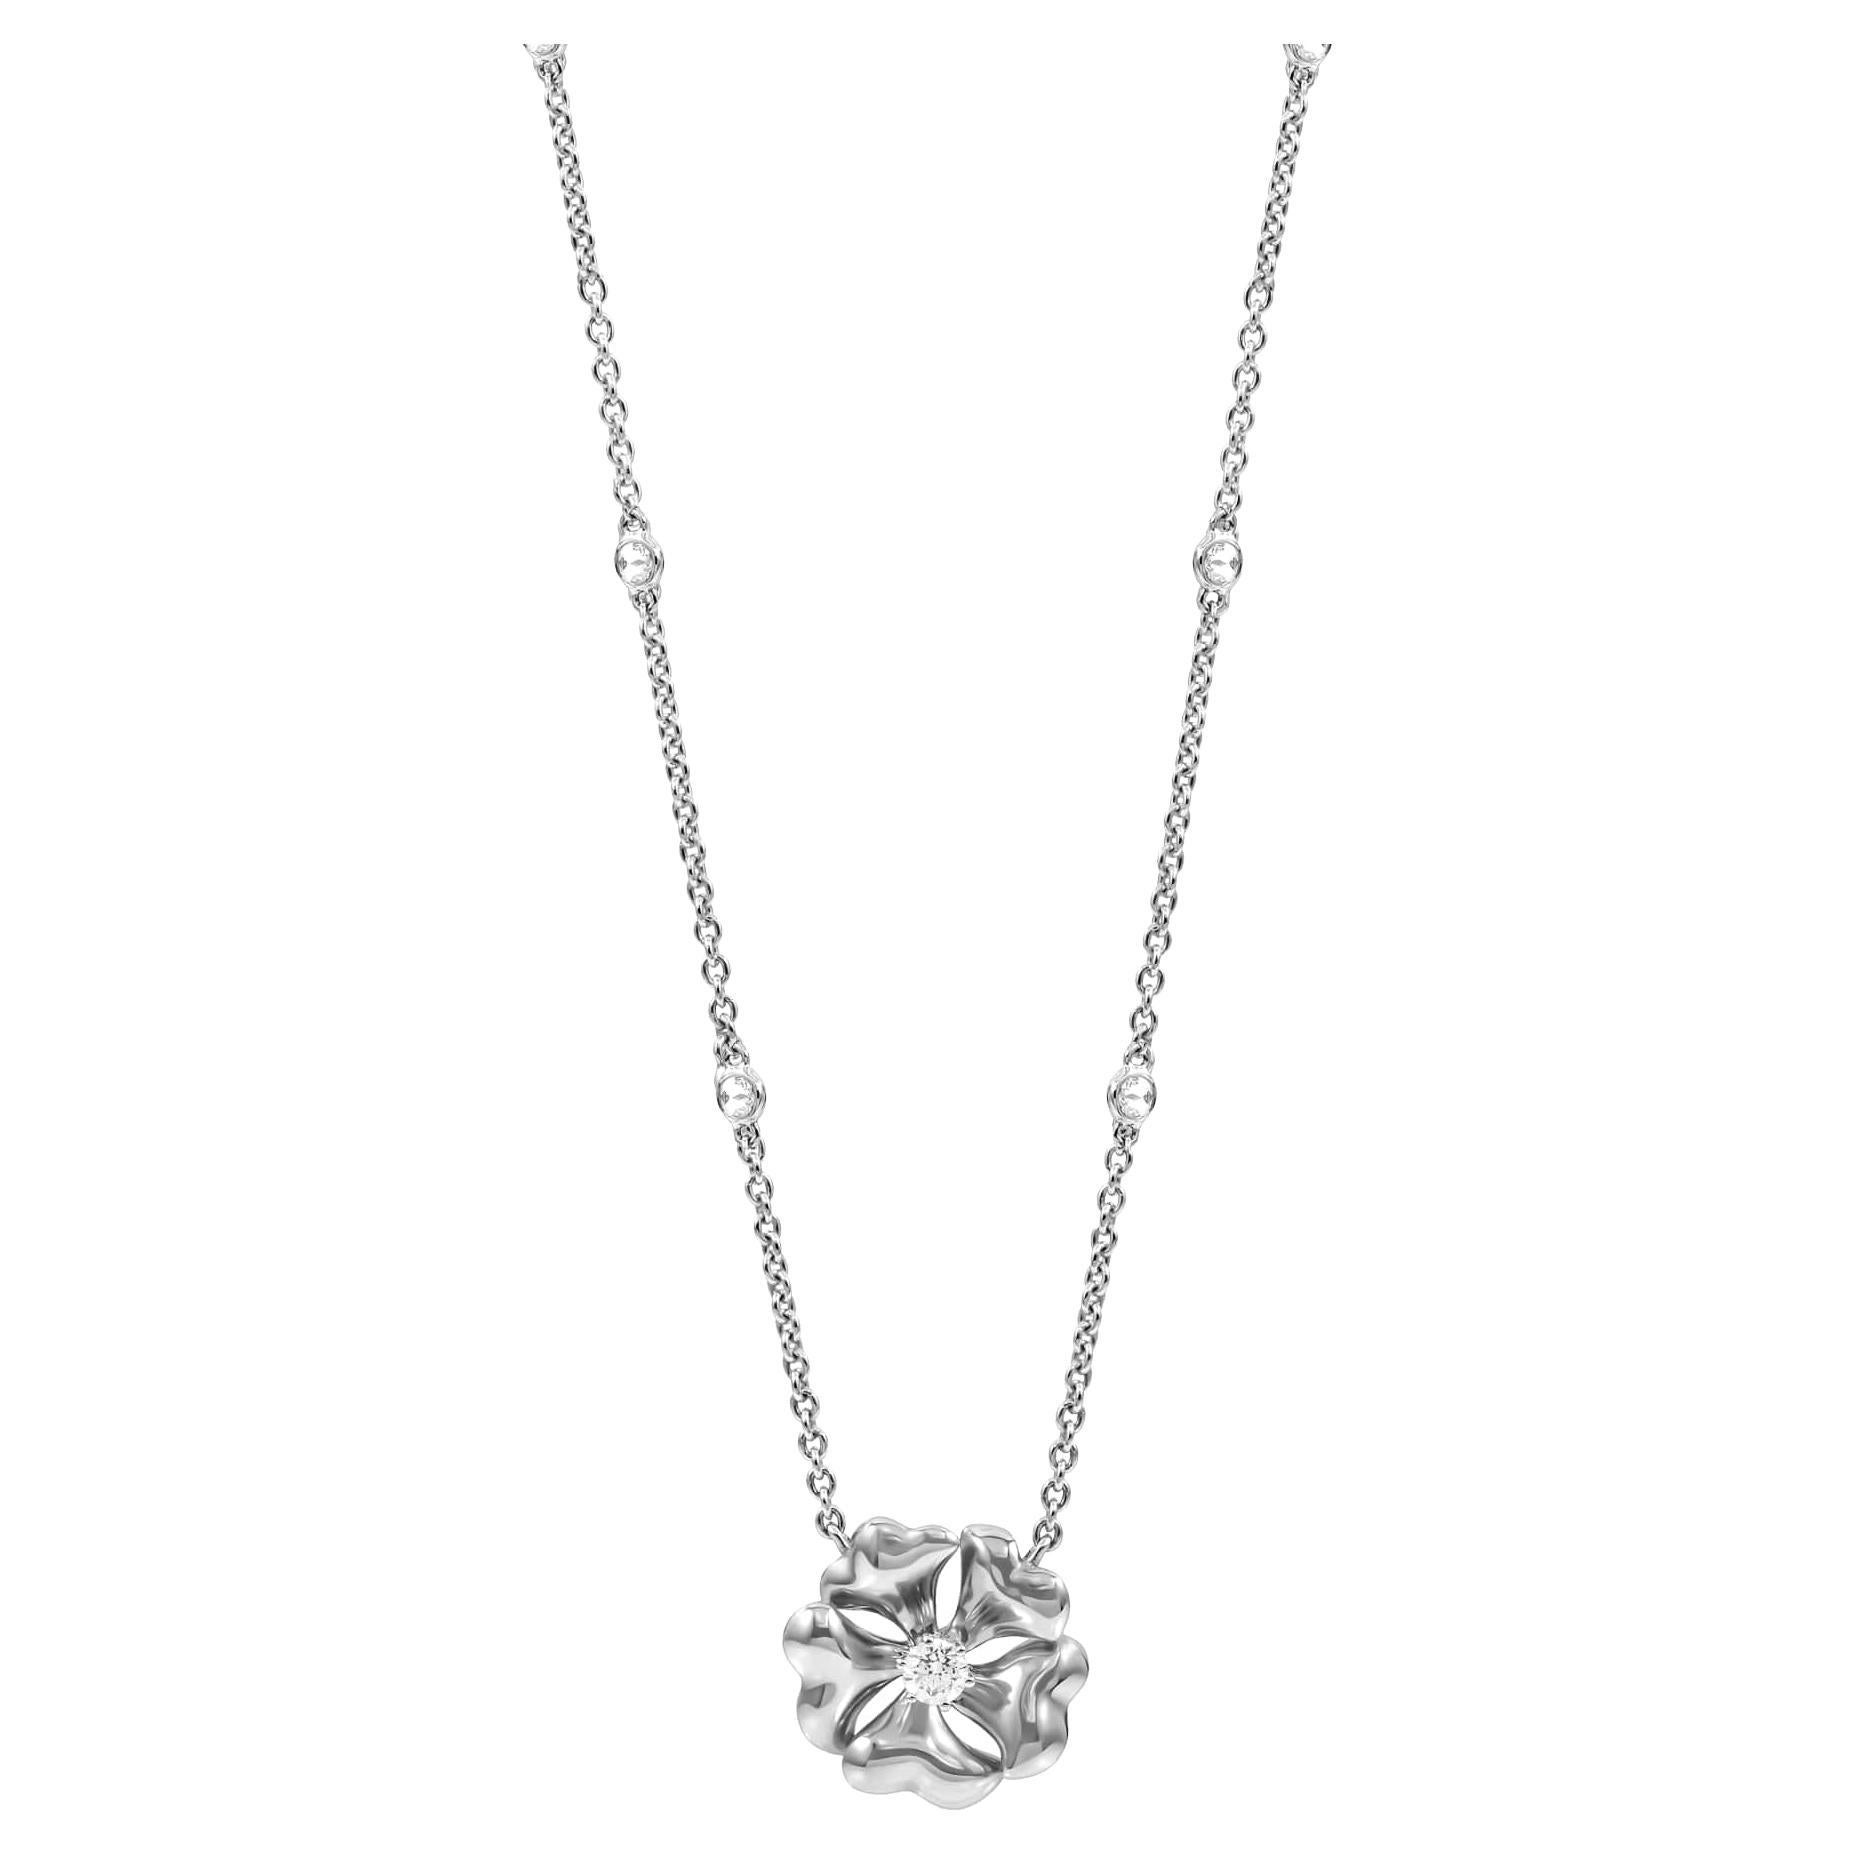 Bloom Gold and Diamond Flower Necklace in 18k White Gold